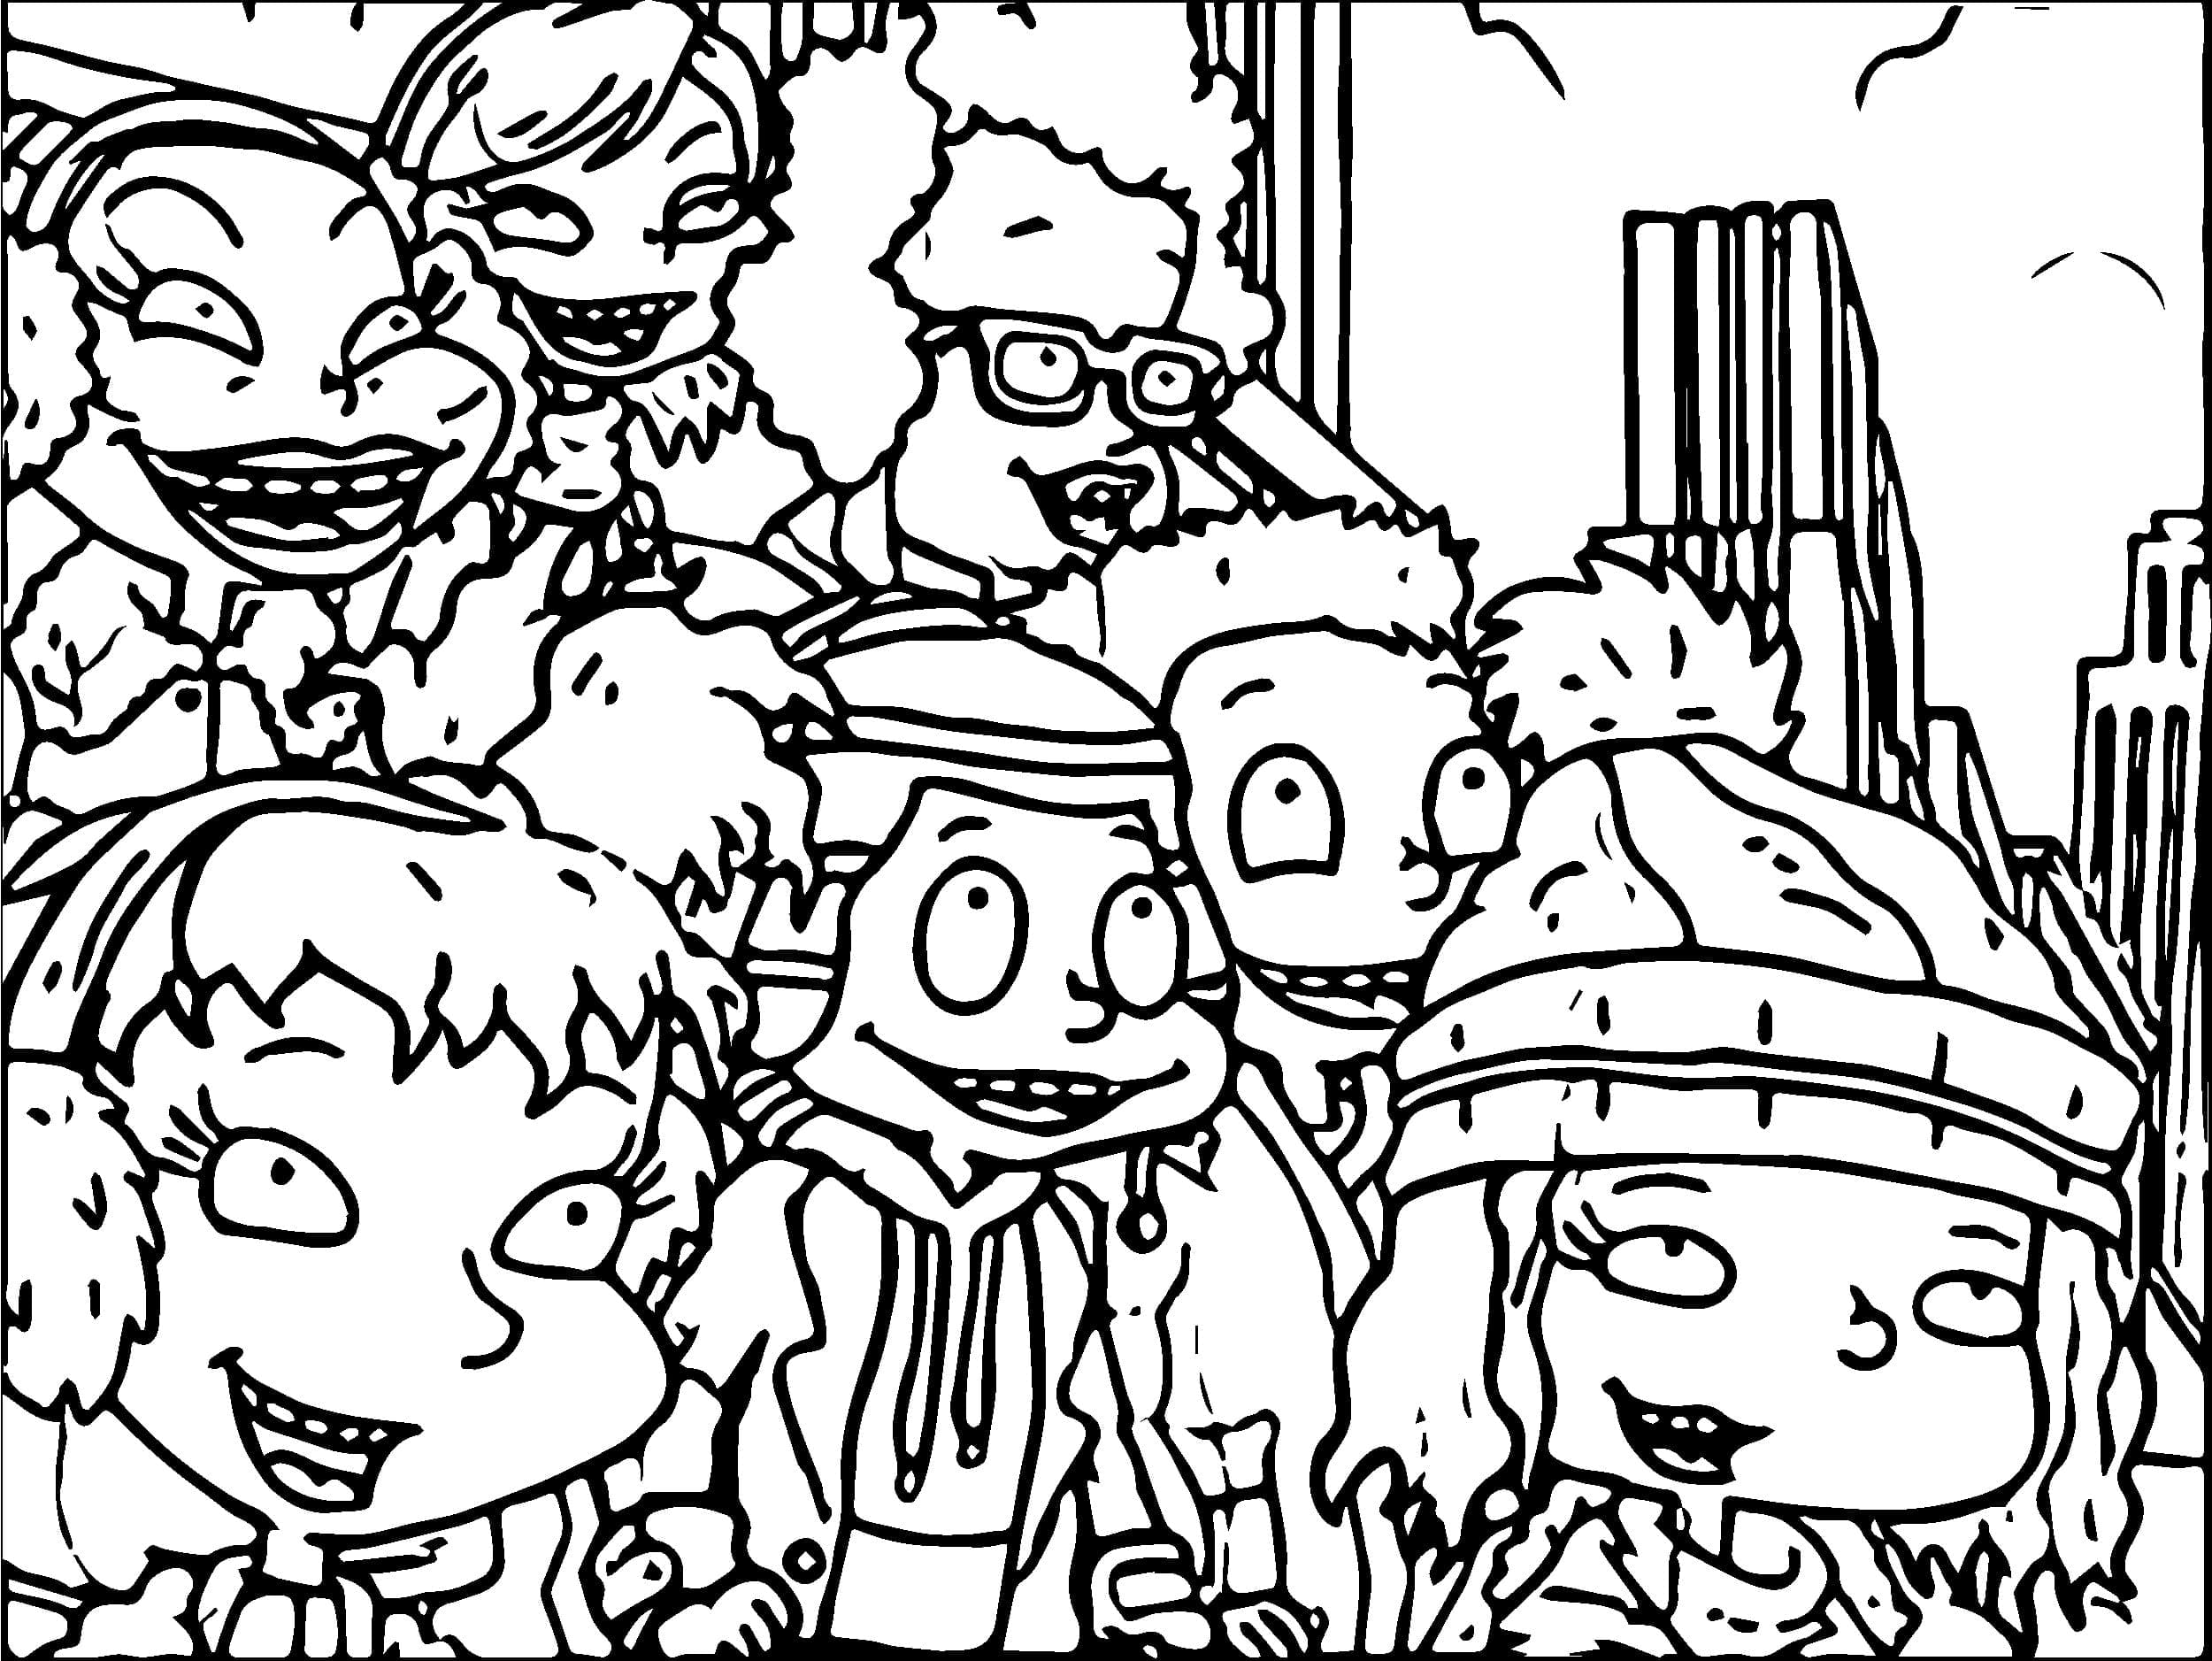 Razmoket coloring page